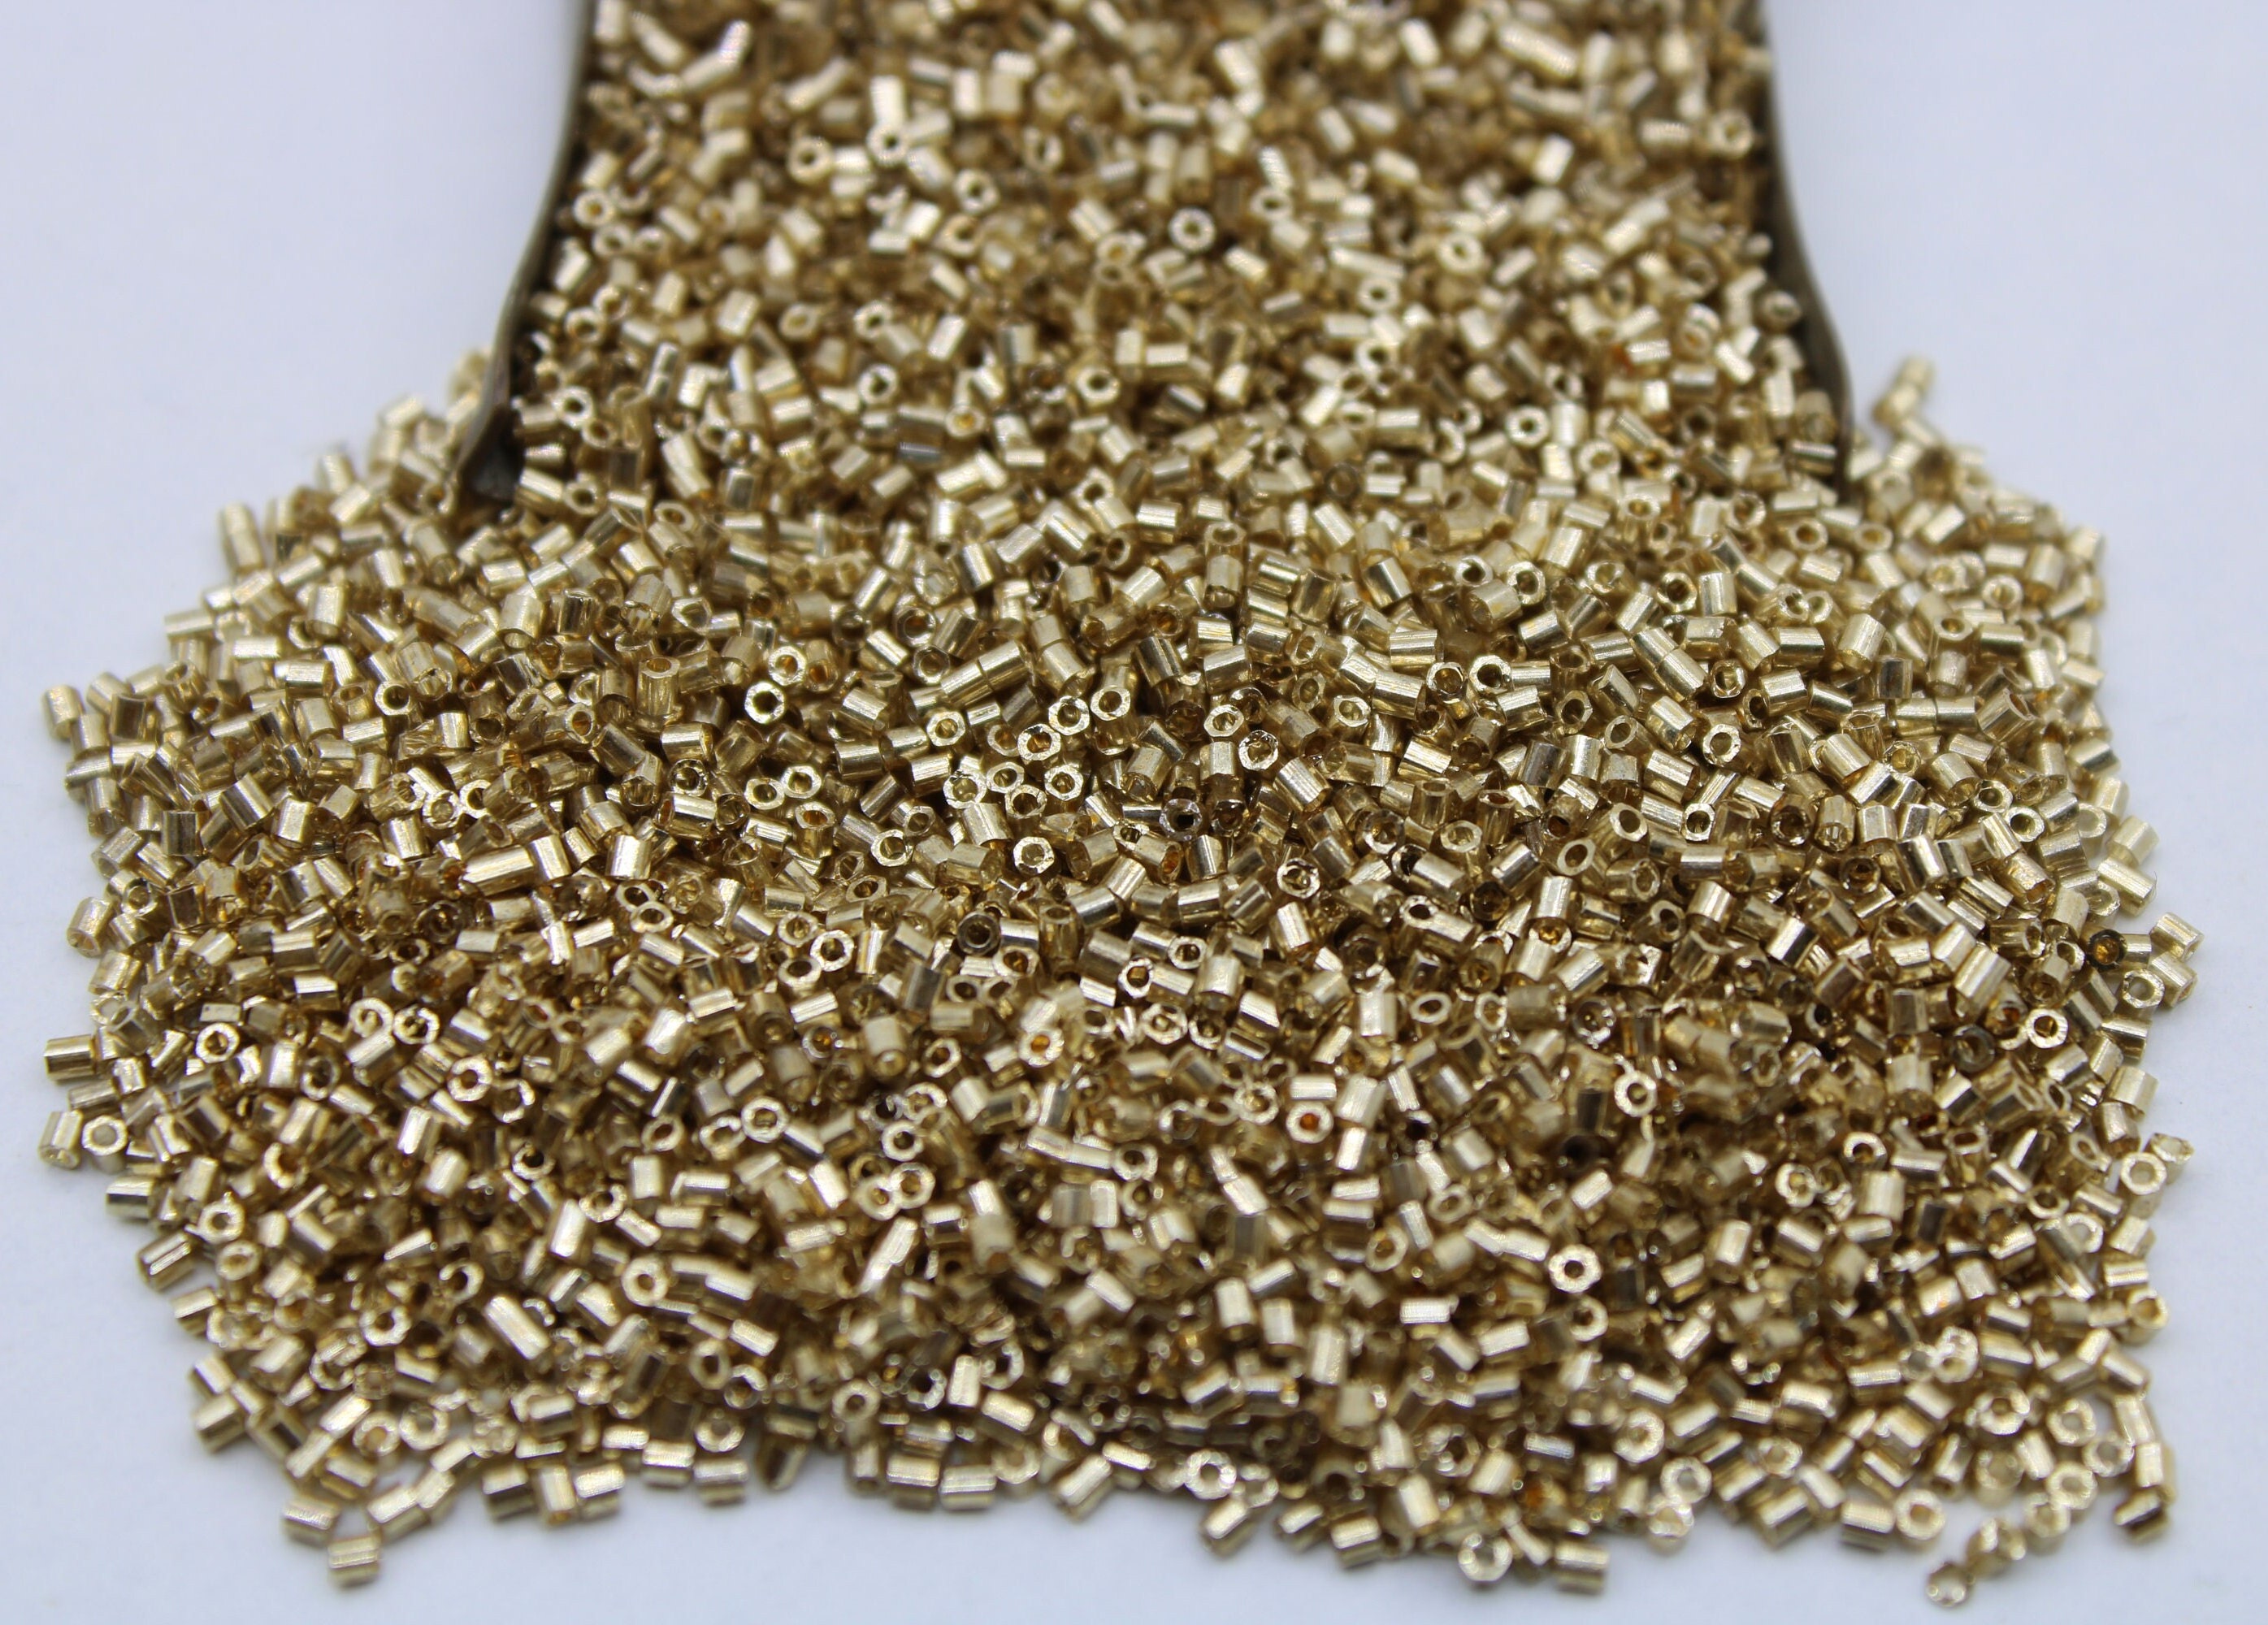  Embroiderymaterial 10/0 Seed Beads Glass Beads for  Craft,Jewelry Making and Embroidery (100gm, Antique Gold) : Arts, Crafts &  Sewing